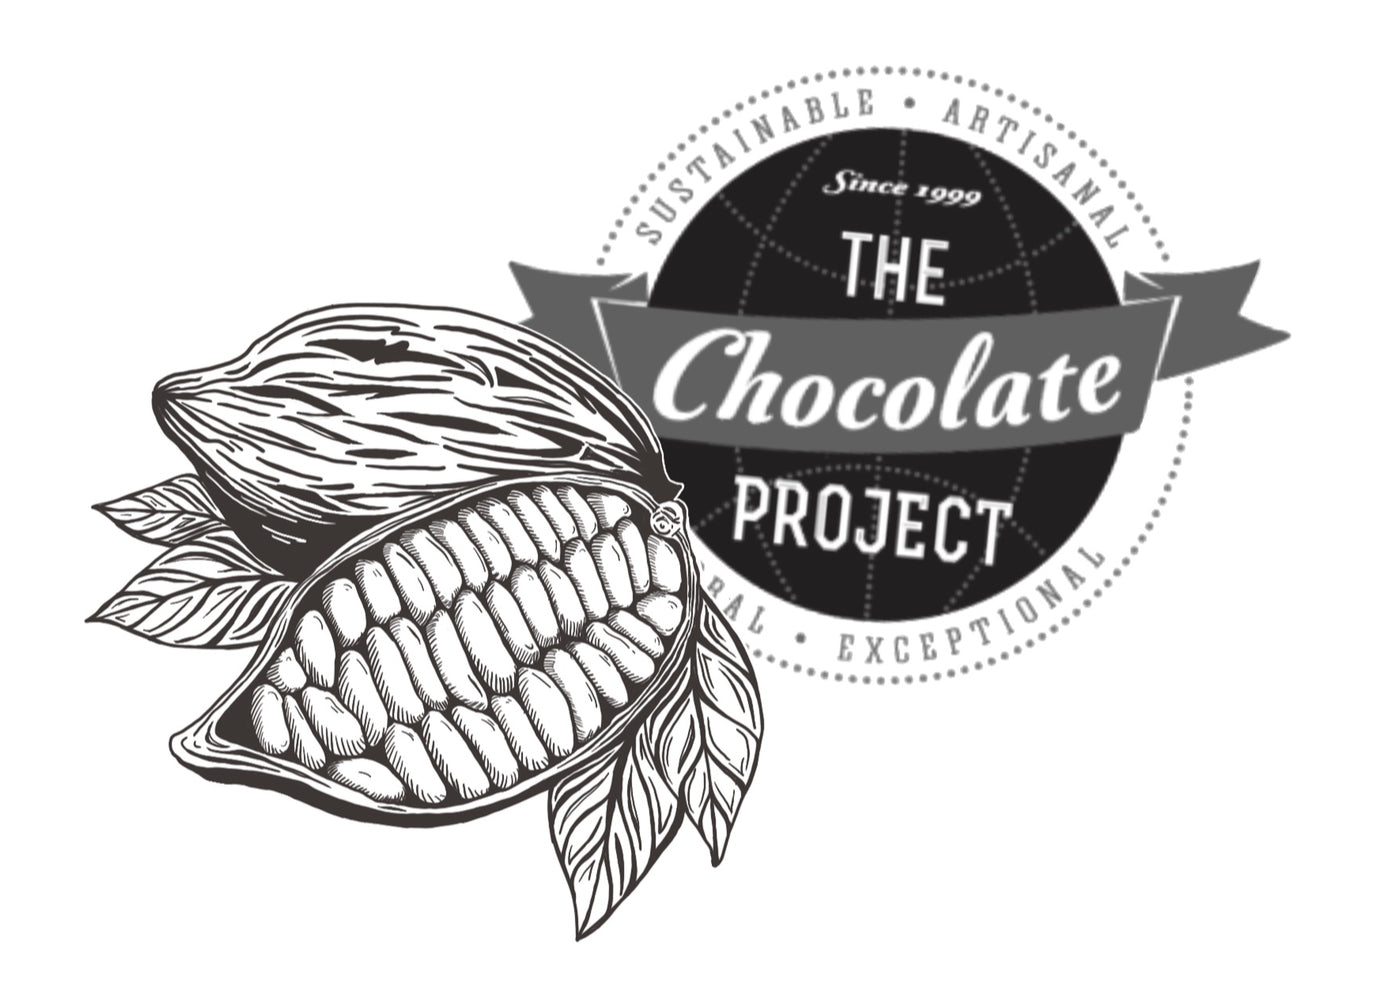 Chocolate Masterclass- Cacao 101- Introduction to craft Chocolate on Saturday March 23rd at 1pm